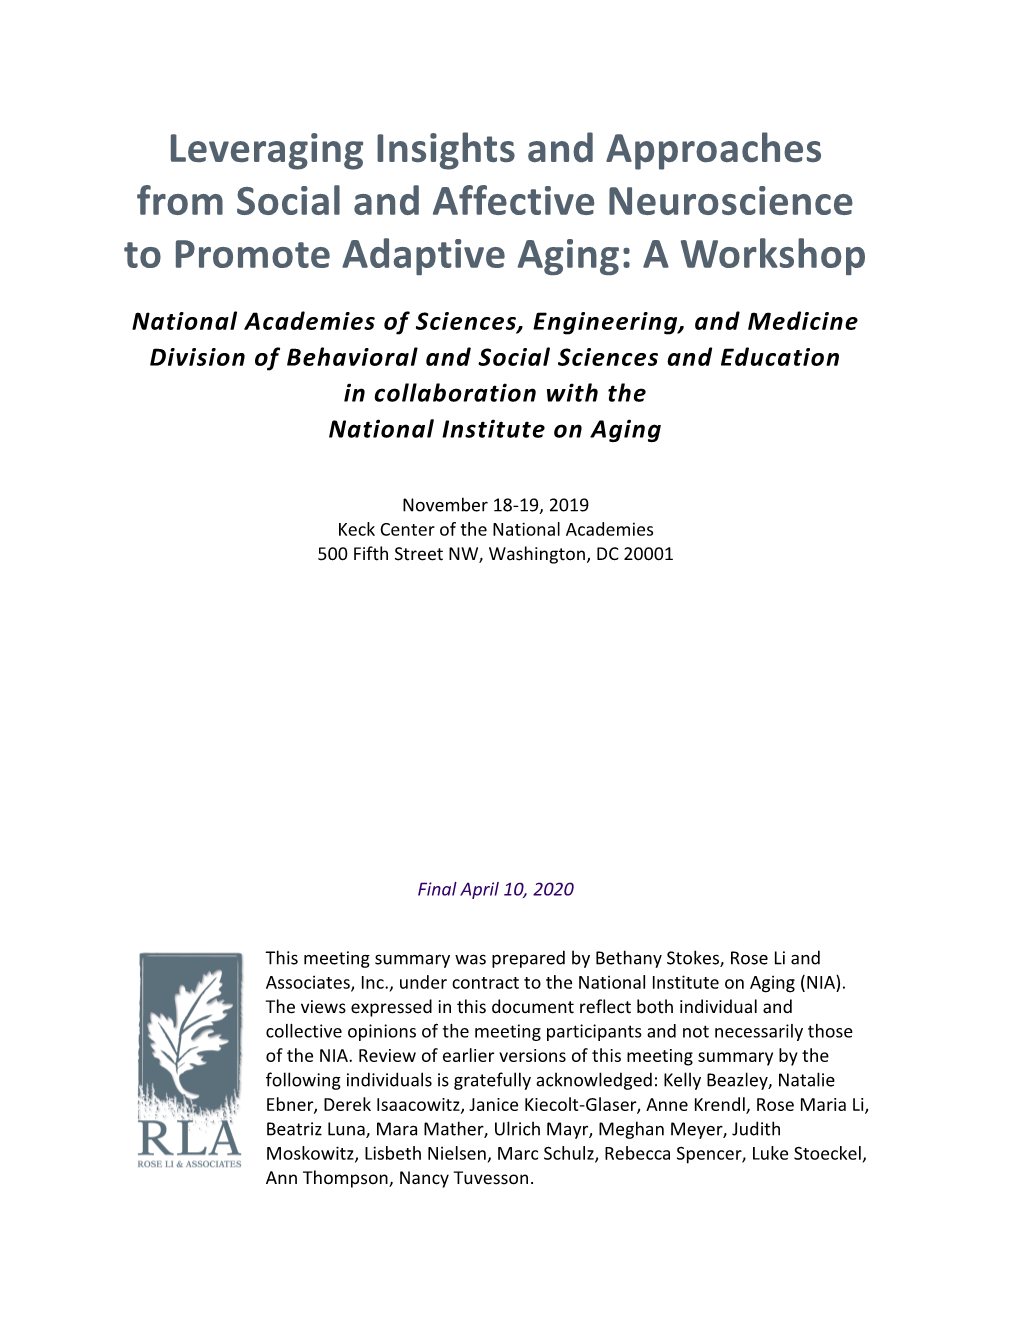 Leveraging Insights and Approaches from Social and Affective Neuroscience to Promote Adaptive Aging: a Workshop